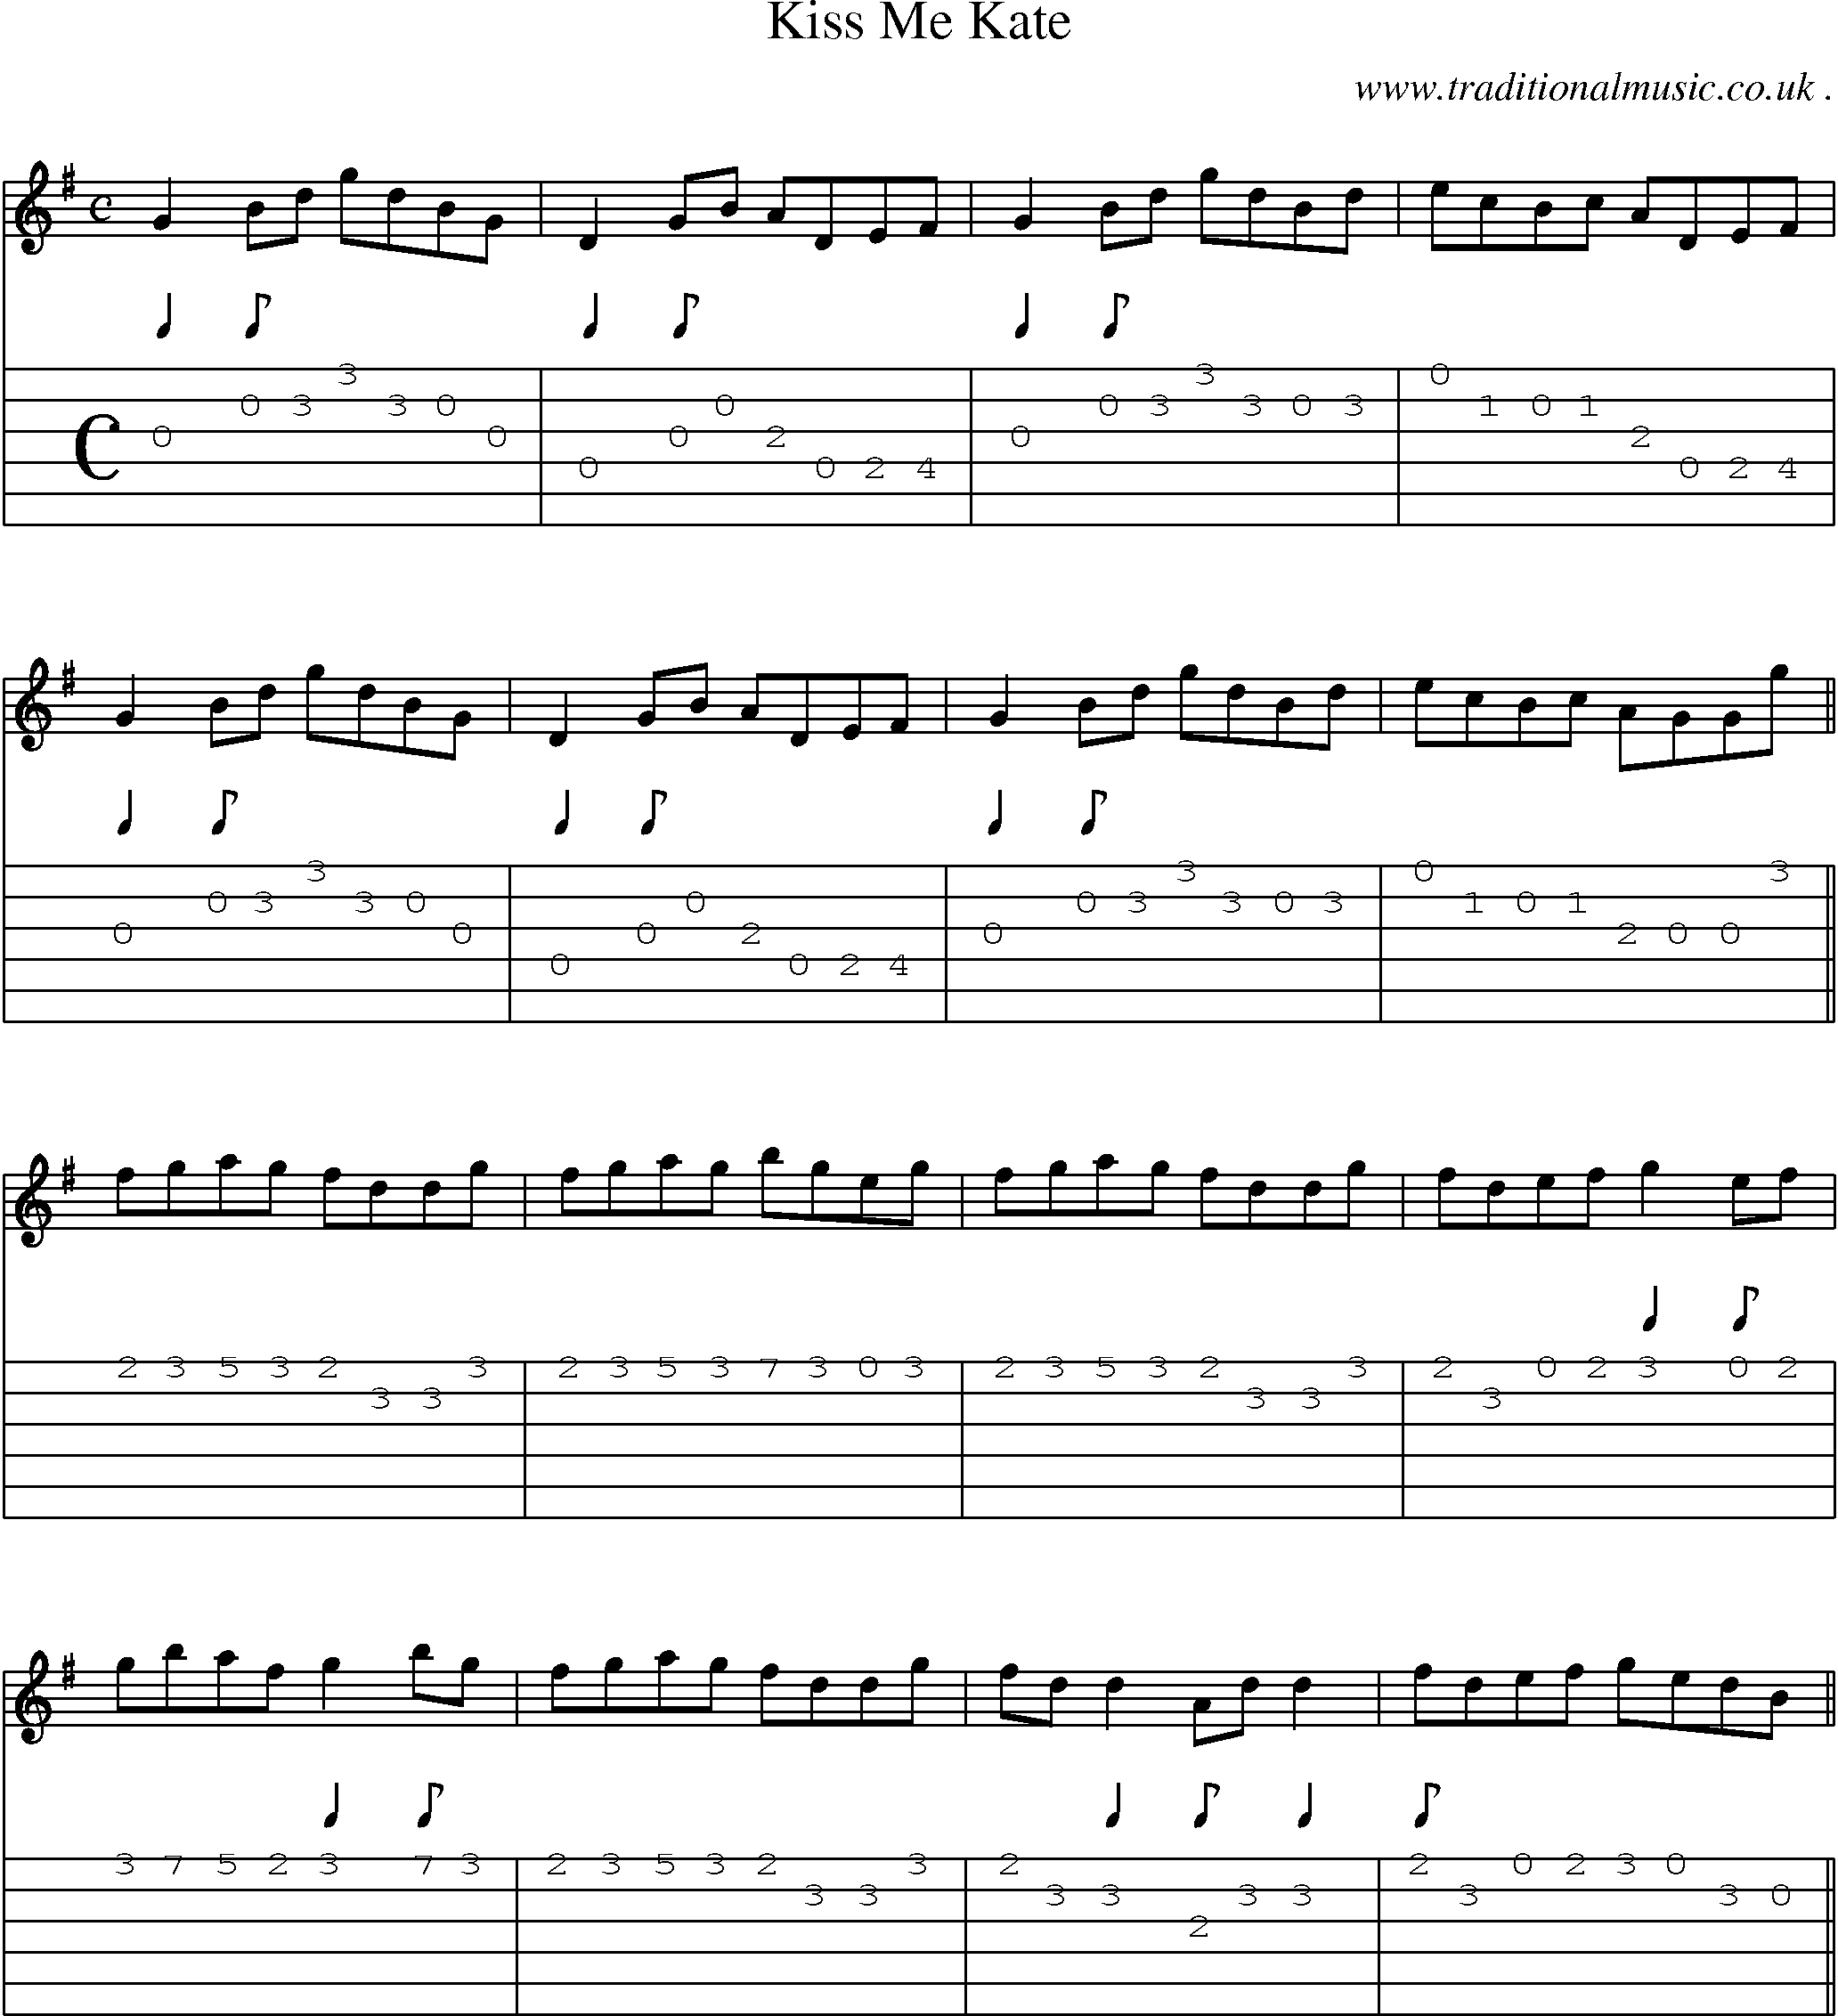 Sheet-Music and Guitar Tabs for Kiss Me Kate